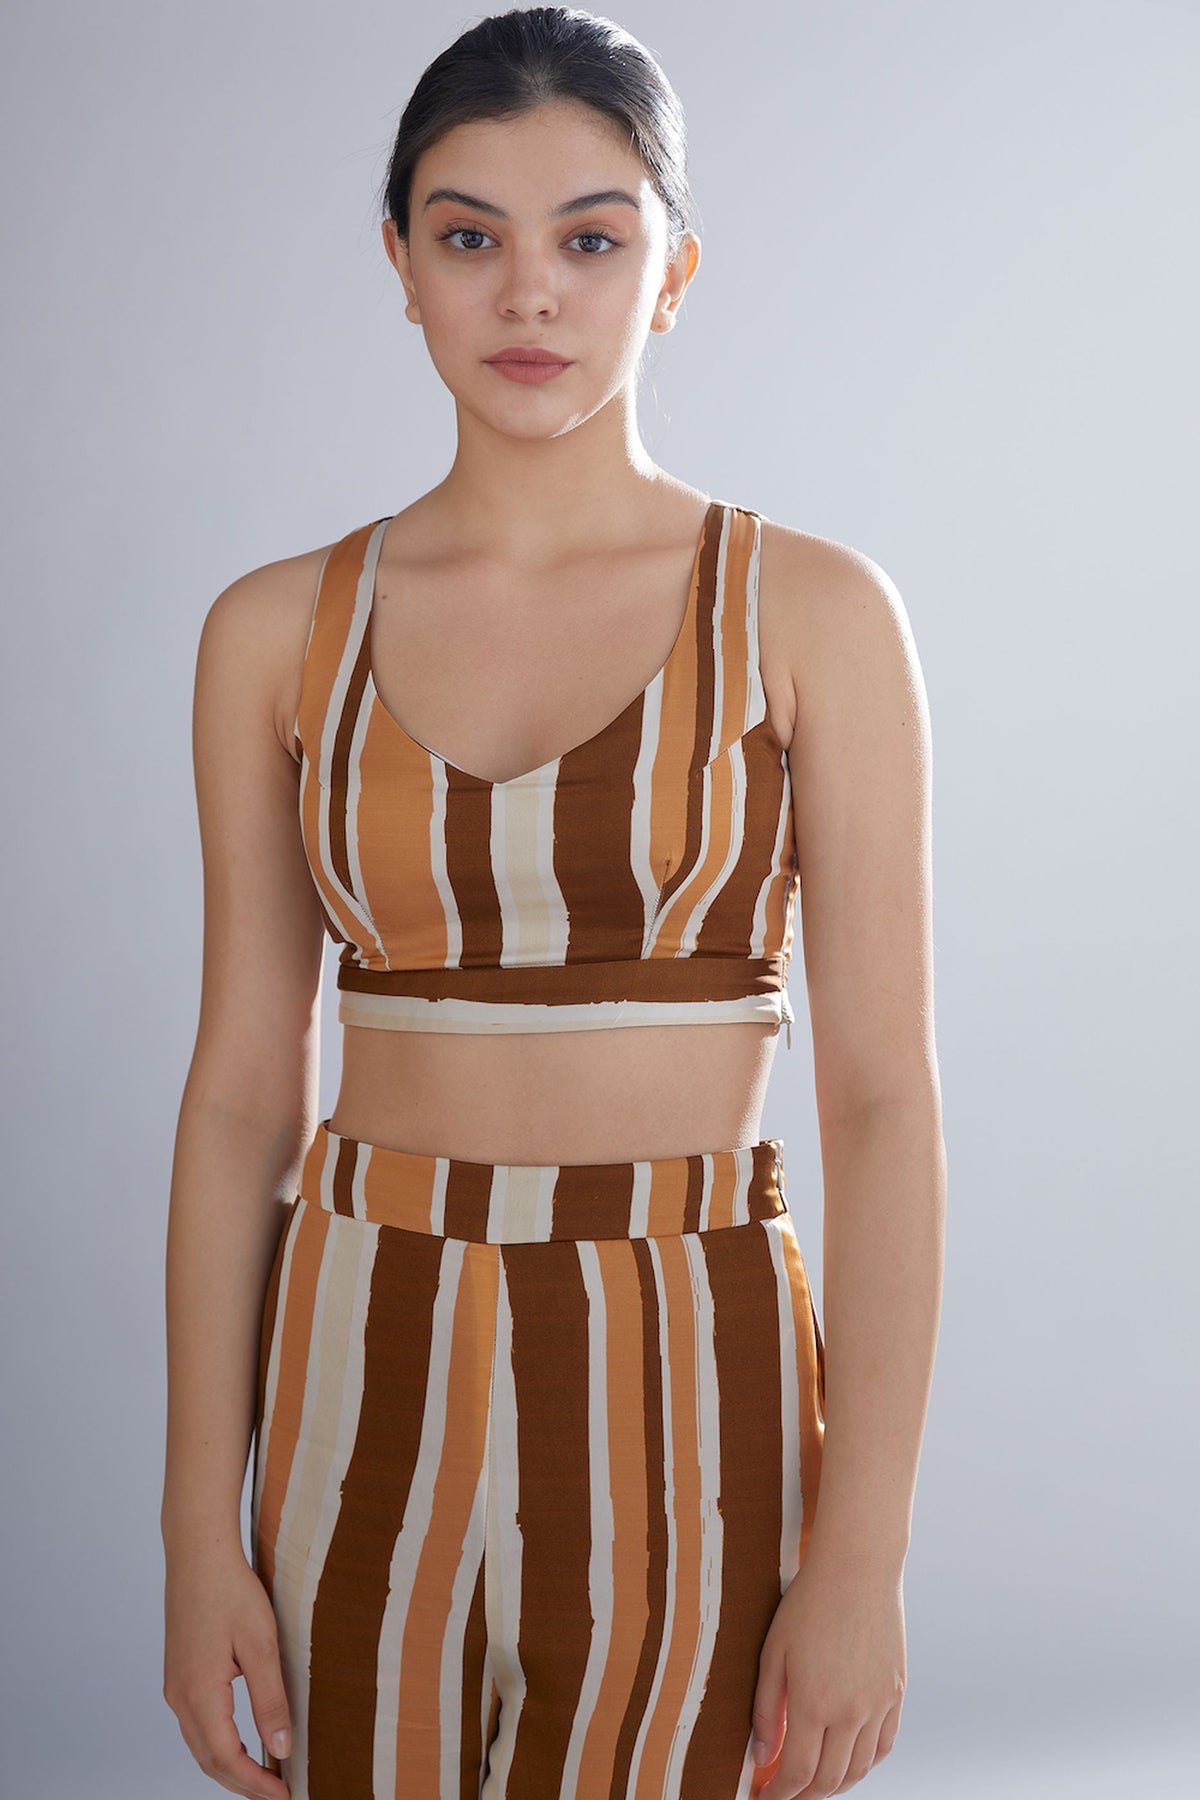 BROWN RUST AND CREAM STRIPE BUSTIER